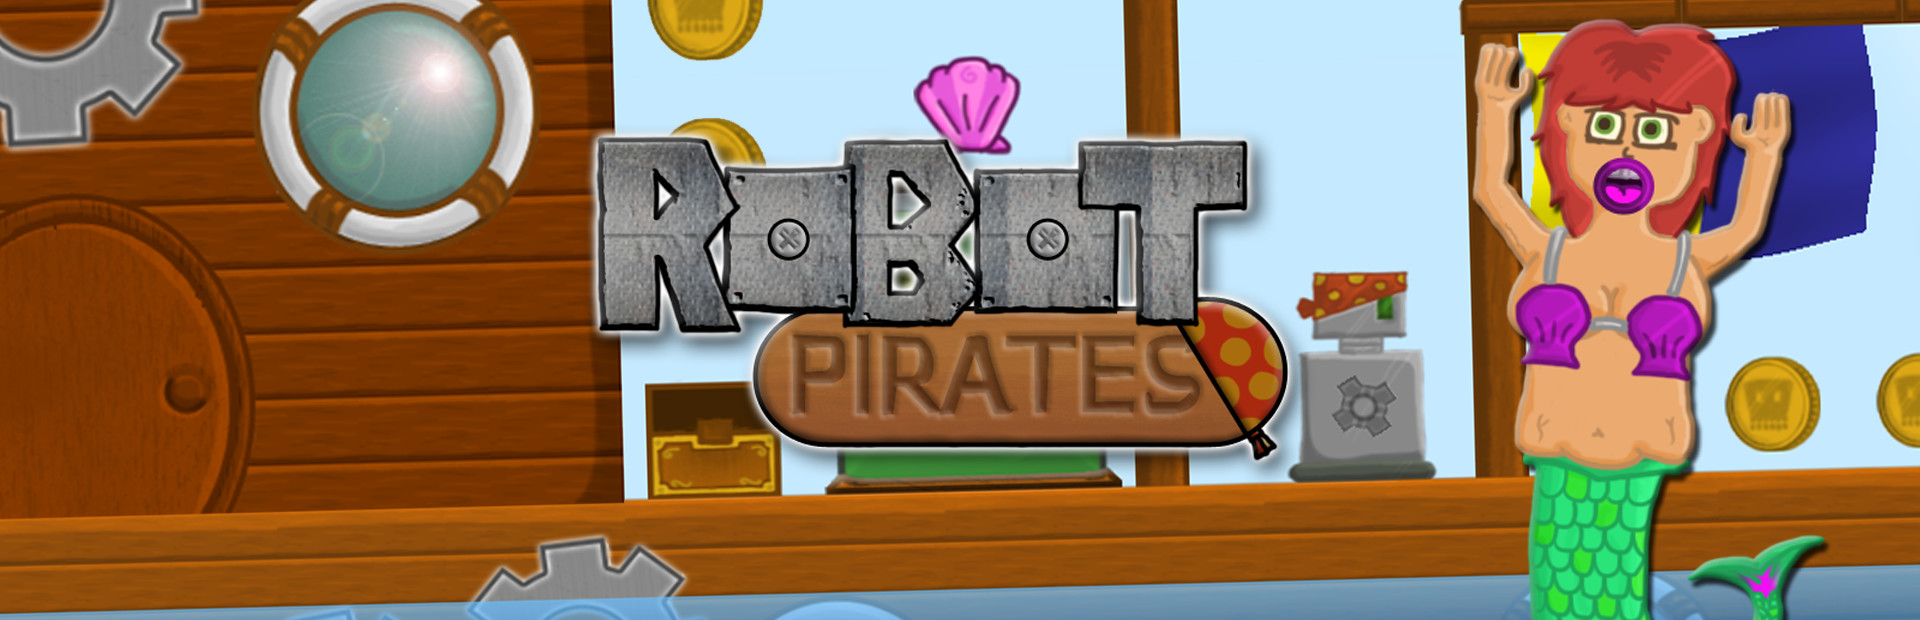 Robot Pirates cover image